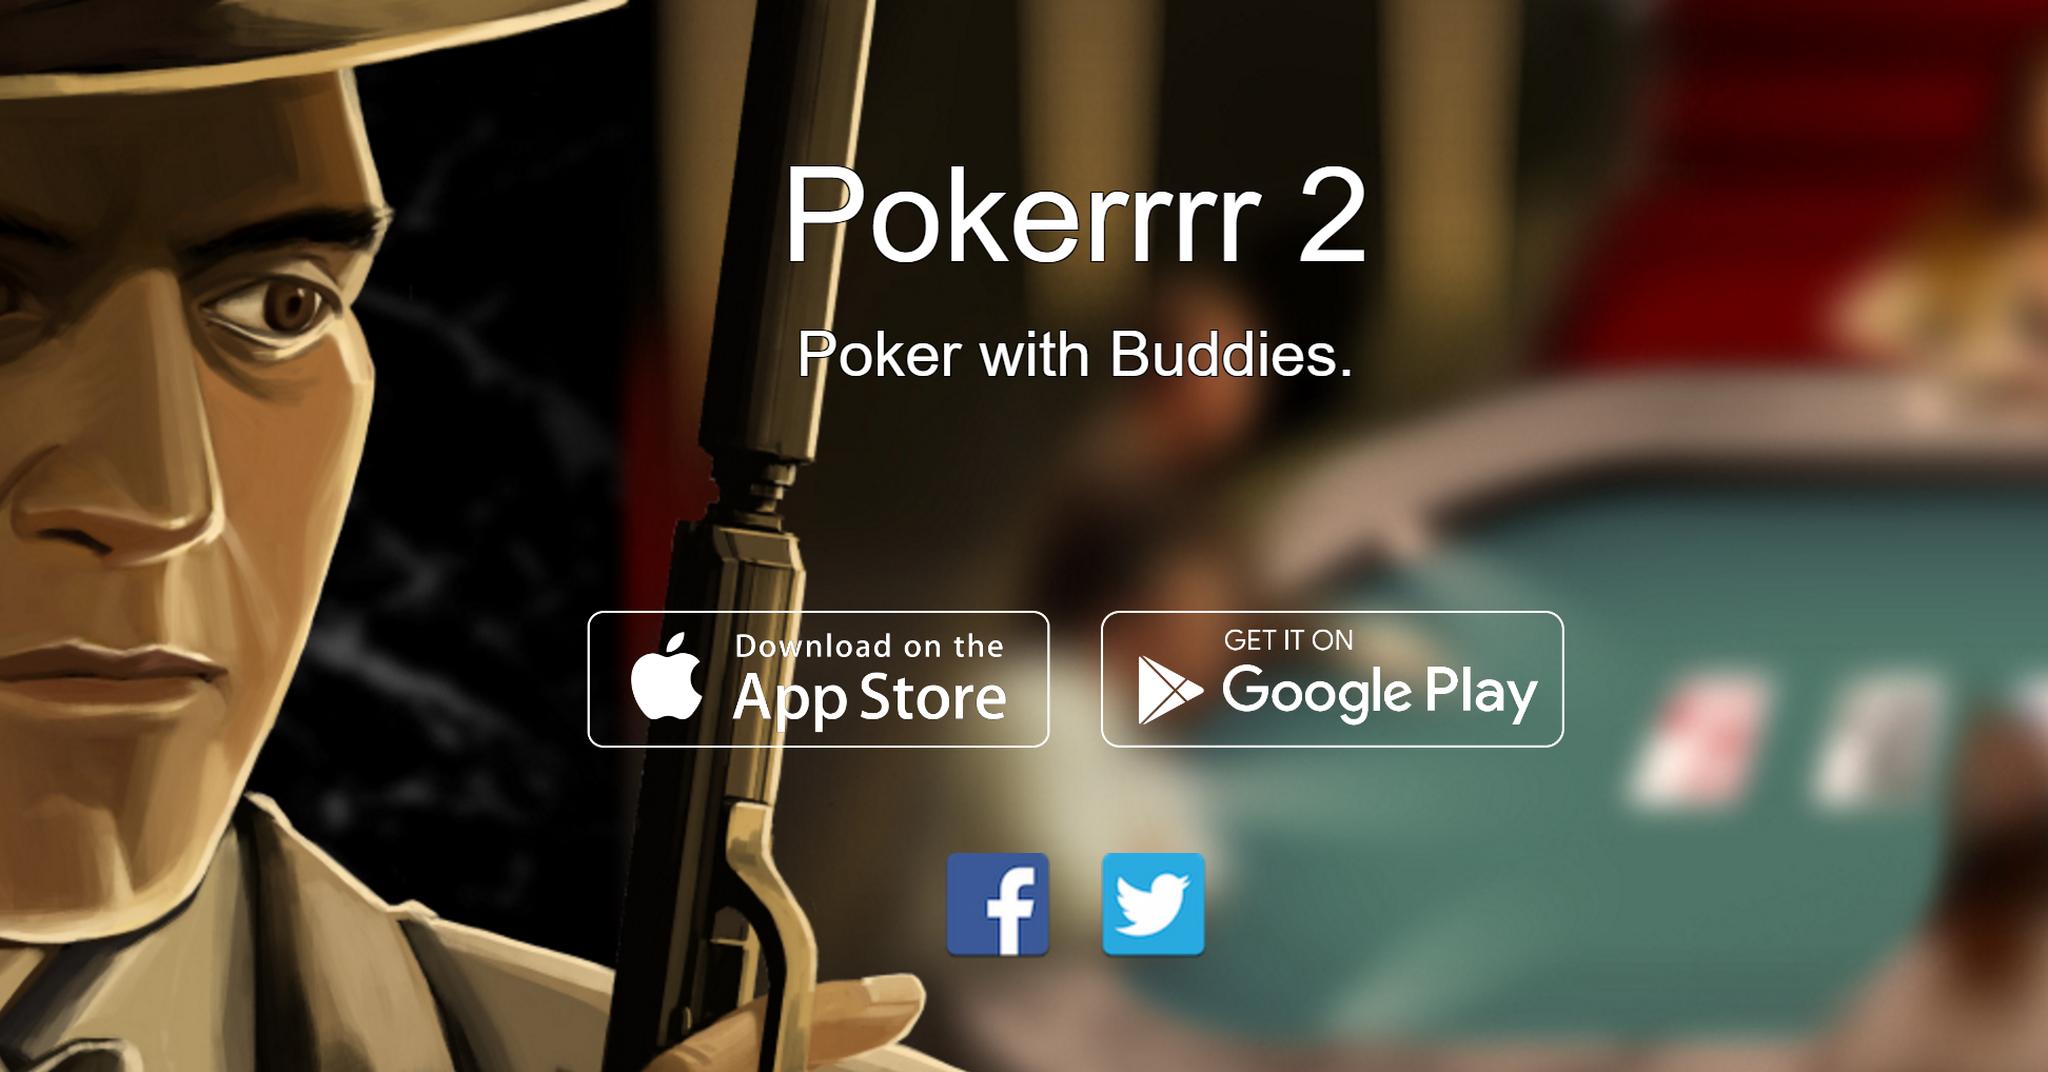 Troubleshoot Solutions Of Pokerrrr 2 Poker App: An Ultimate Multiplayer Poker App, Features, Top 3 Tips